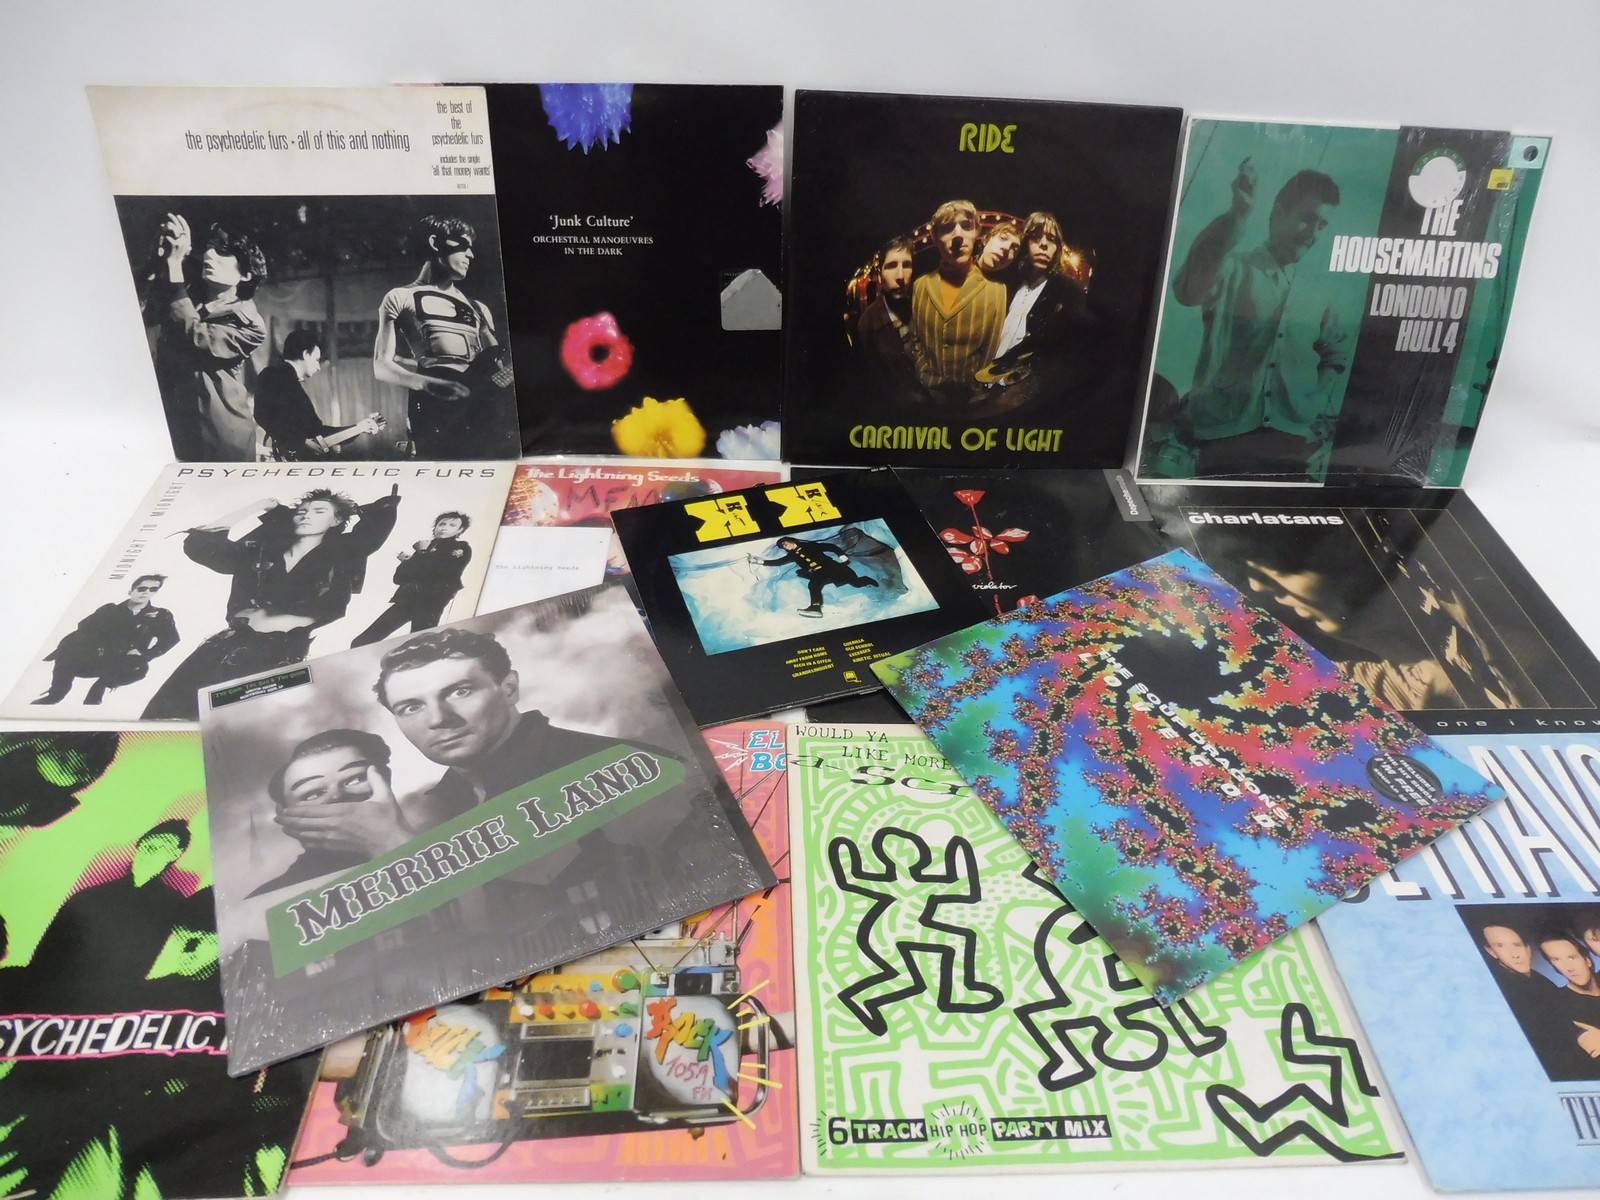 14 Indie LPs to include Ride, Psychadelic Furs, Lightening Seeds, Depeche Mode and others.